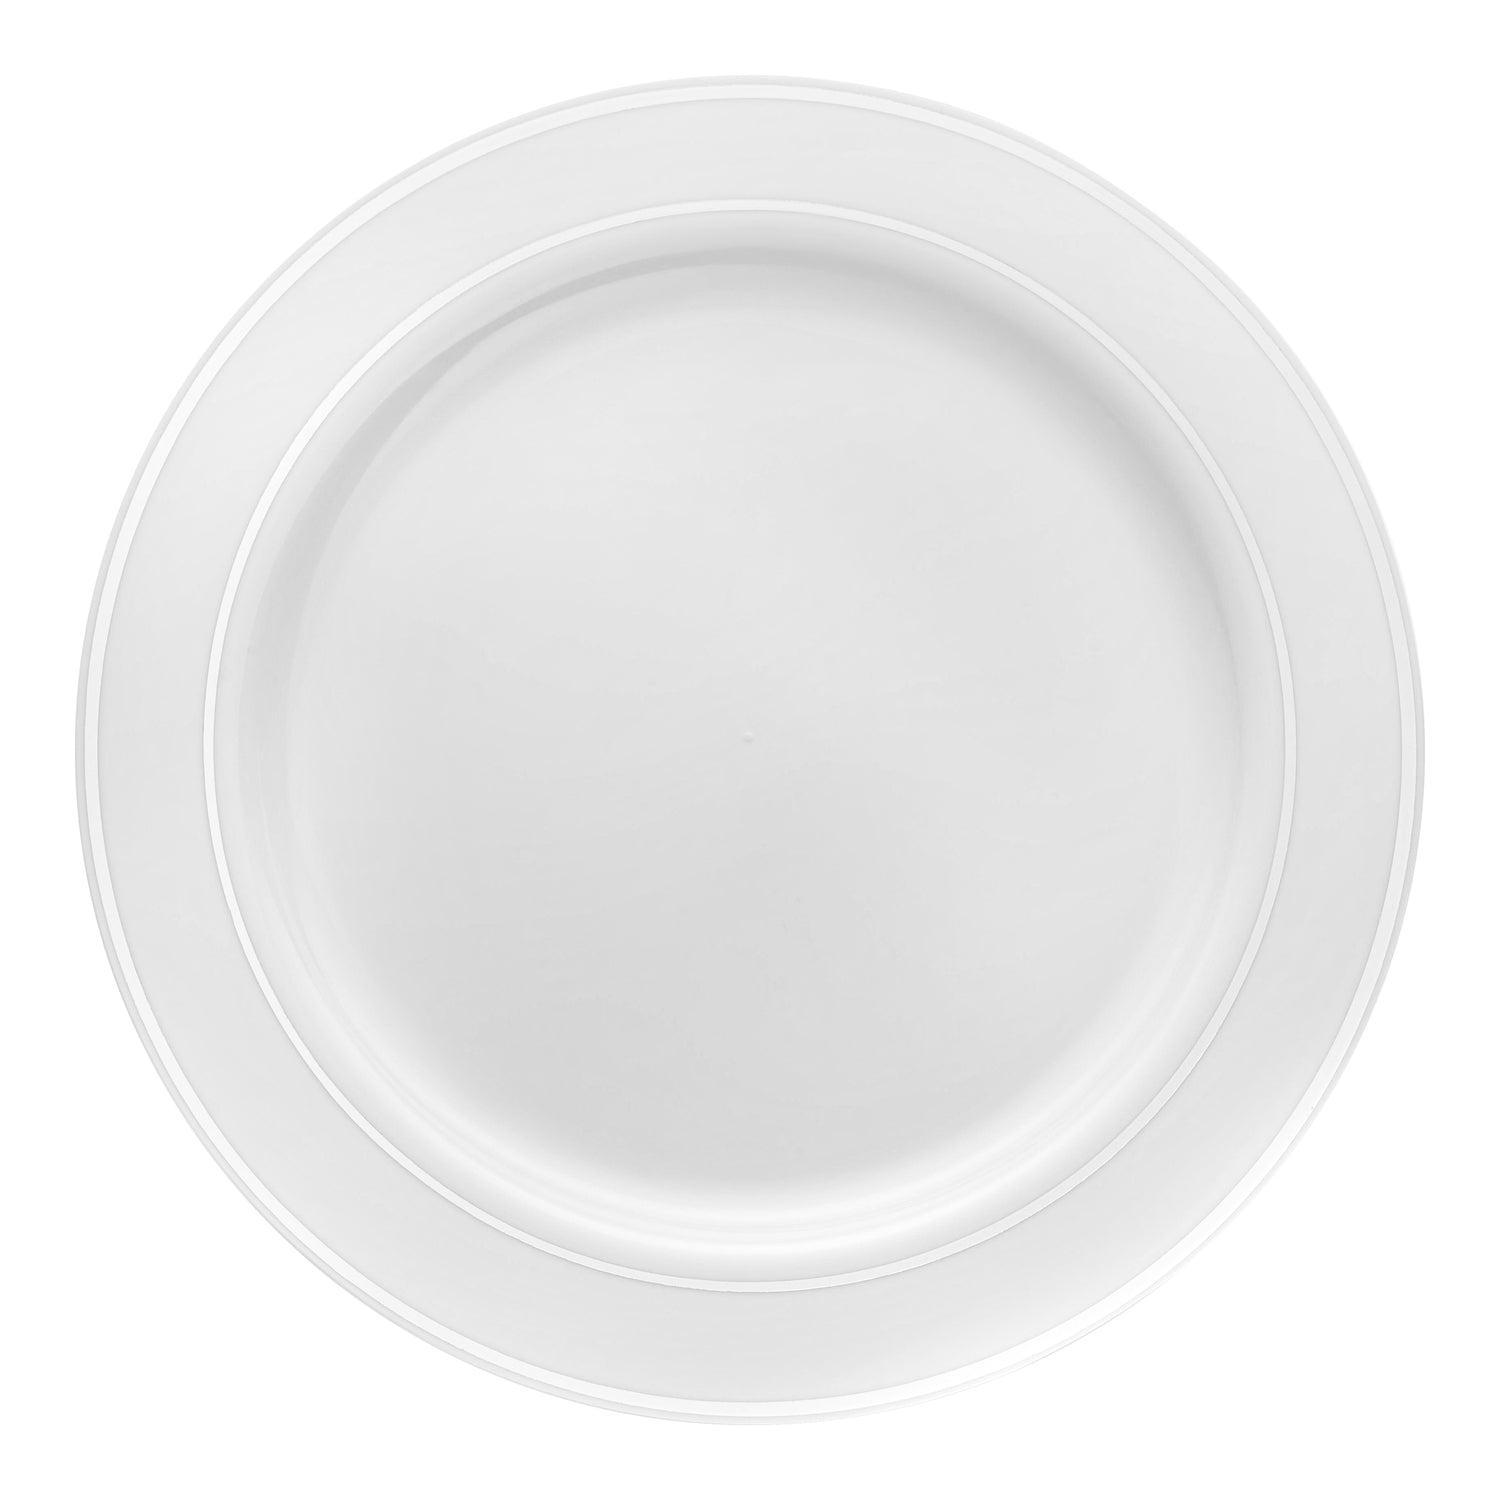 White with Silver Edge Rim Plastic Dinner Plates (10.25") | The Kaya Collection